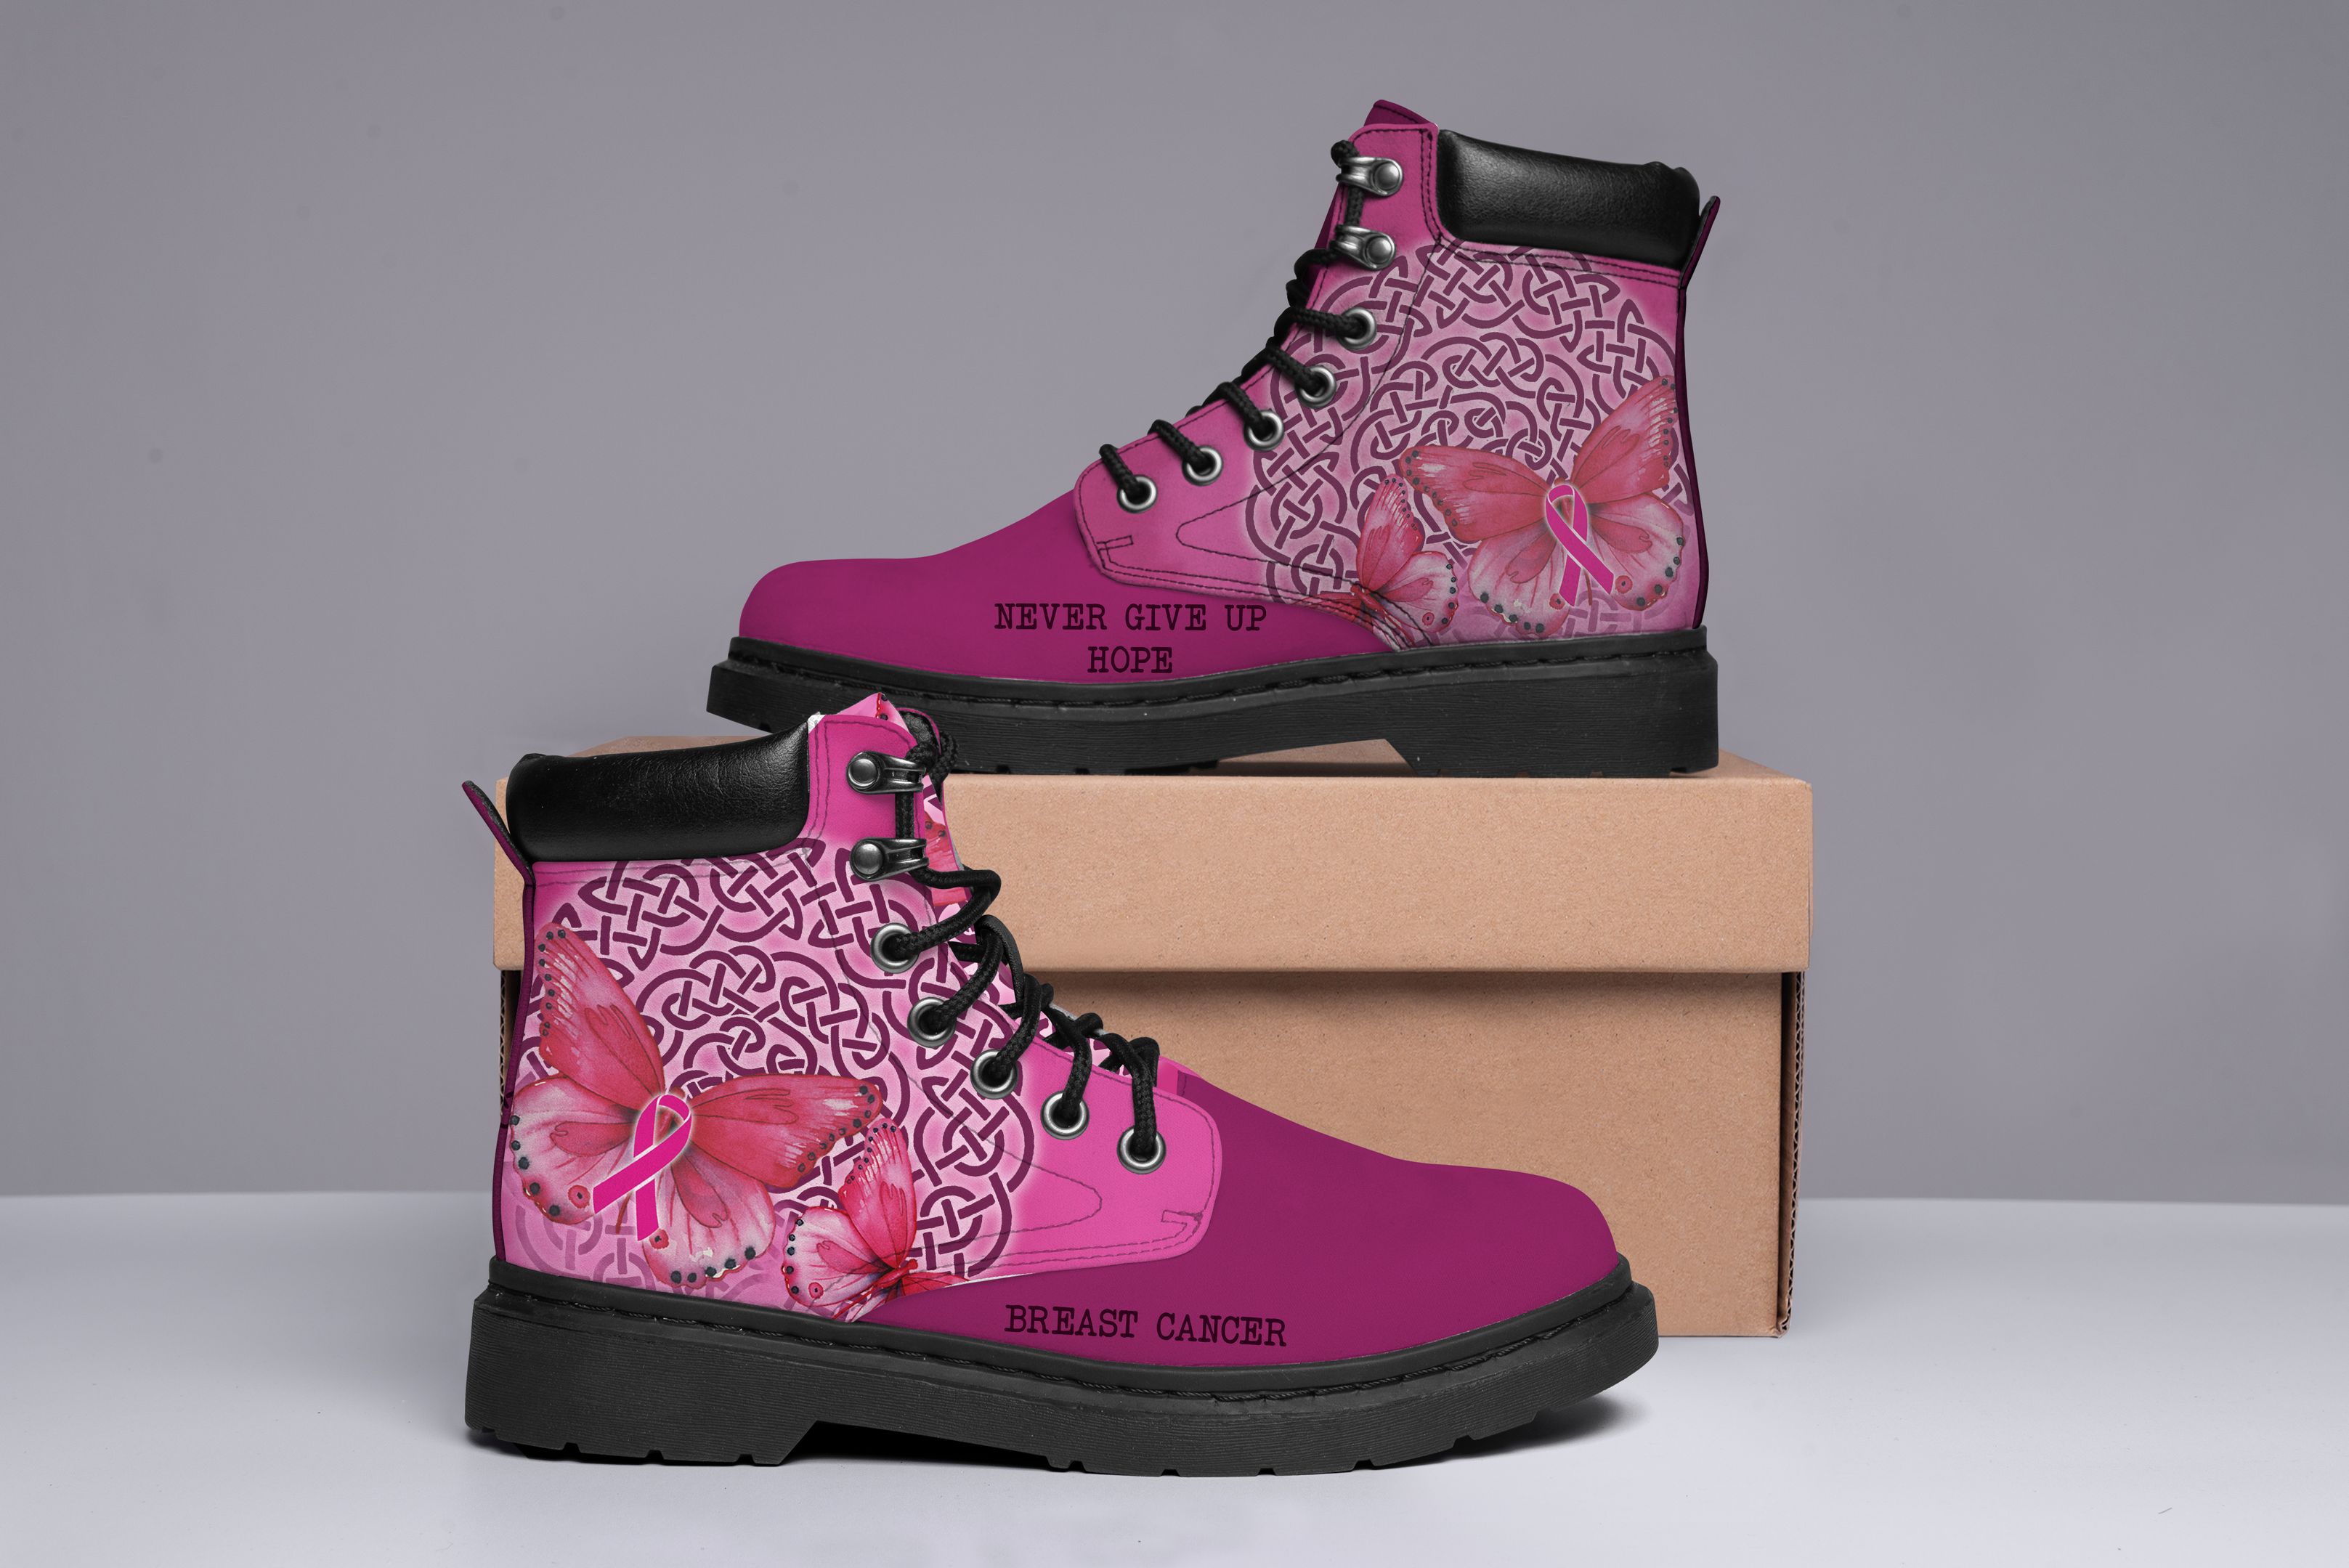 Heaven Give Up Hope Breast Cancer Pink Classic Boots Shoes PANCBO0003